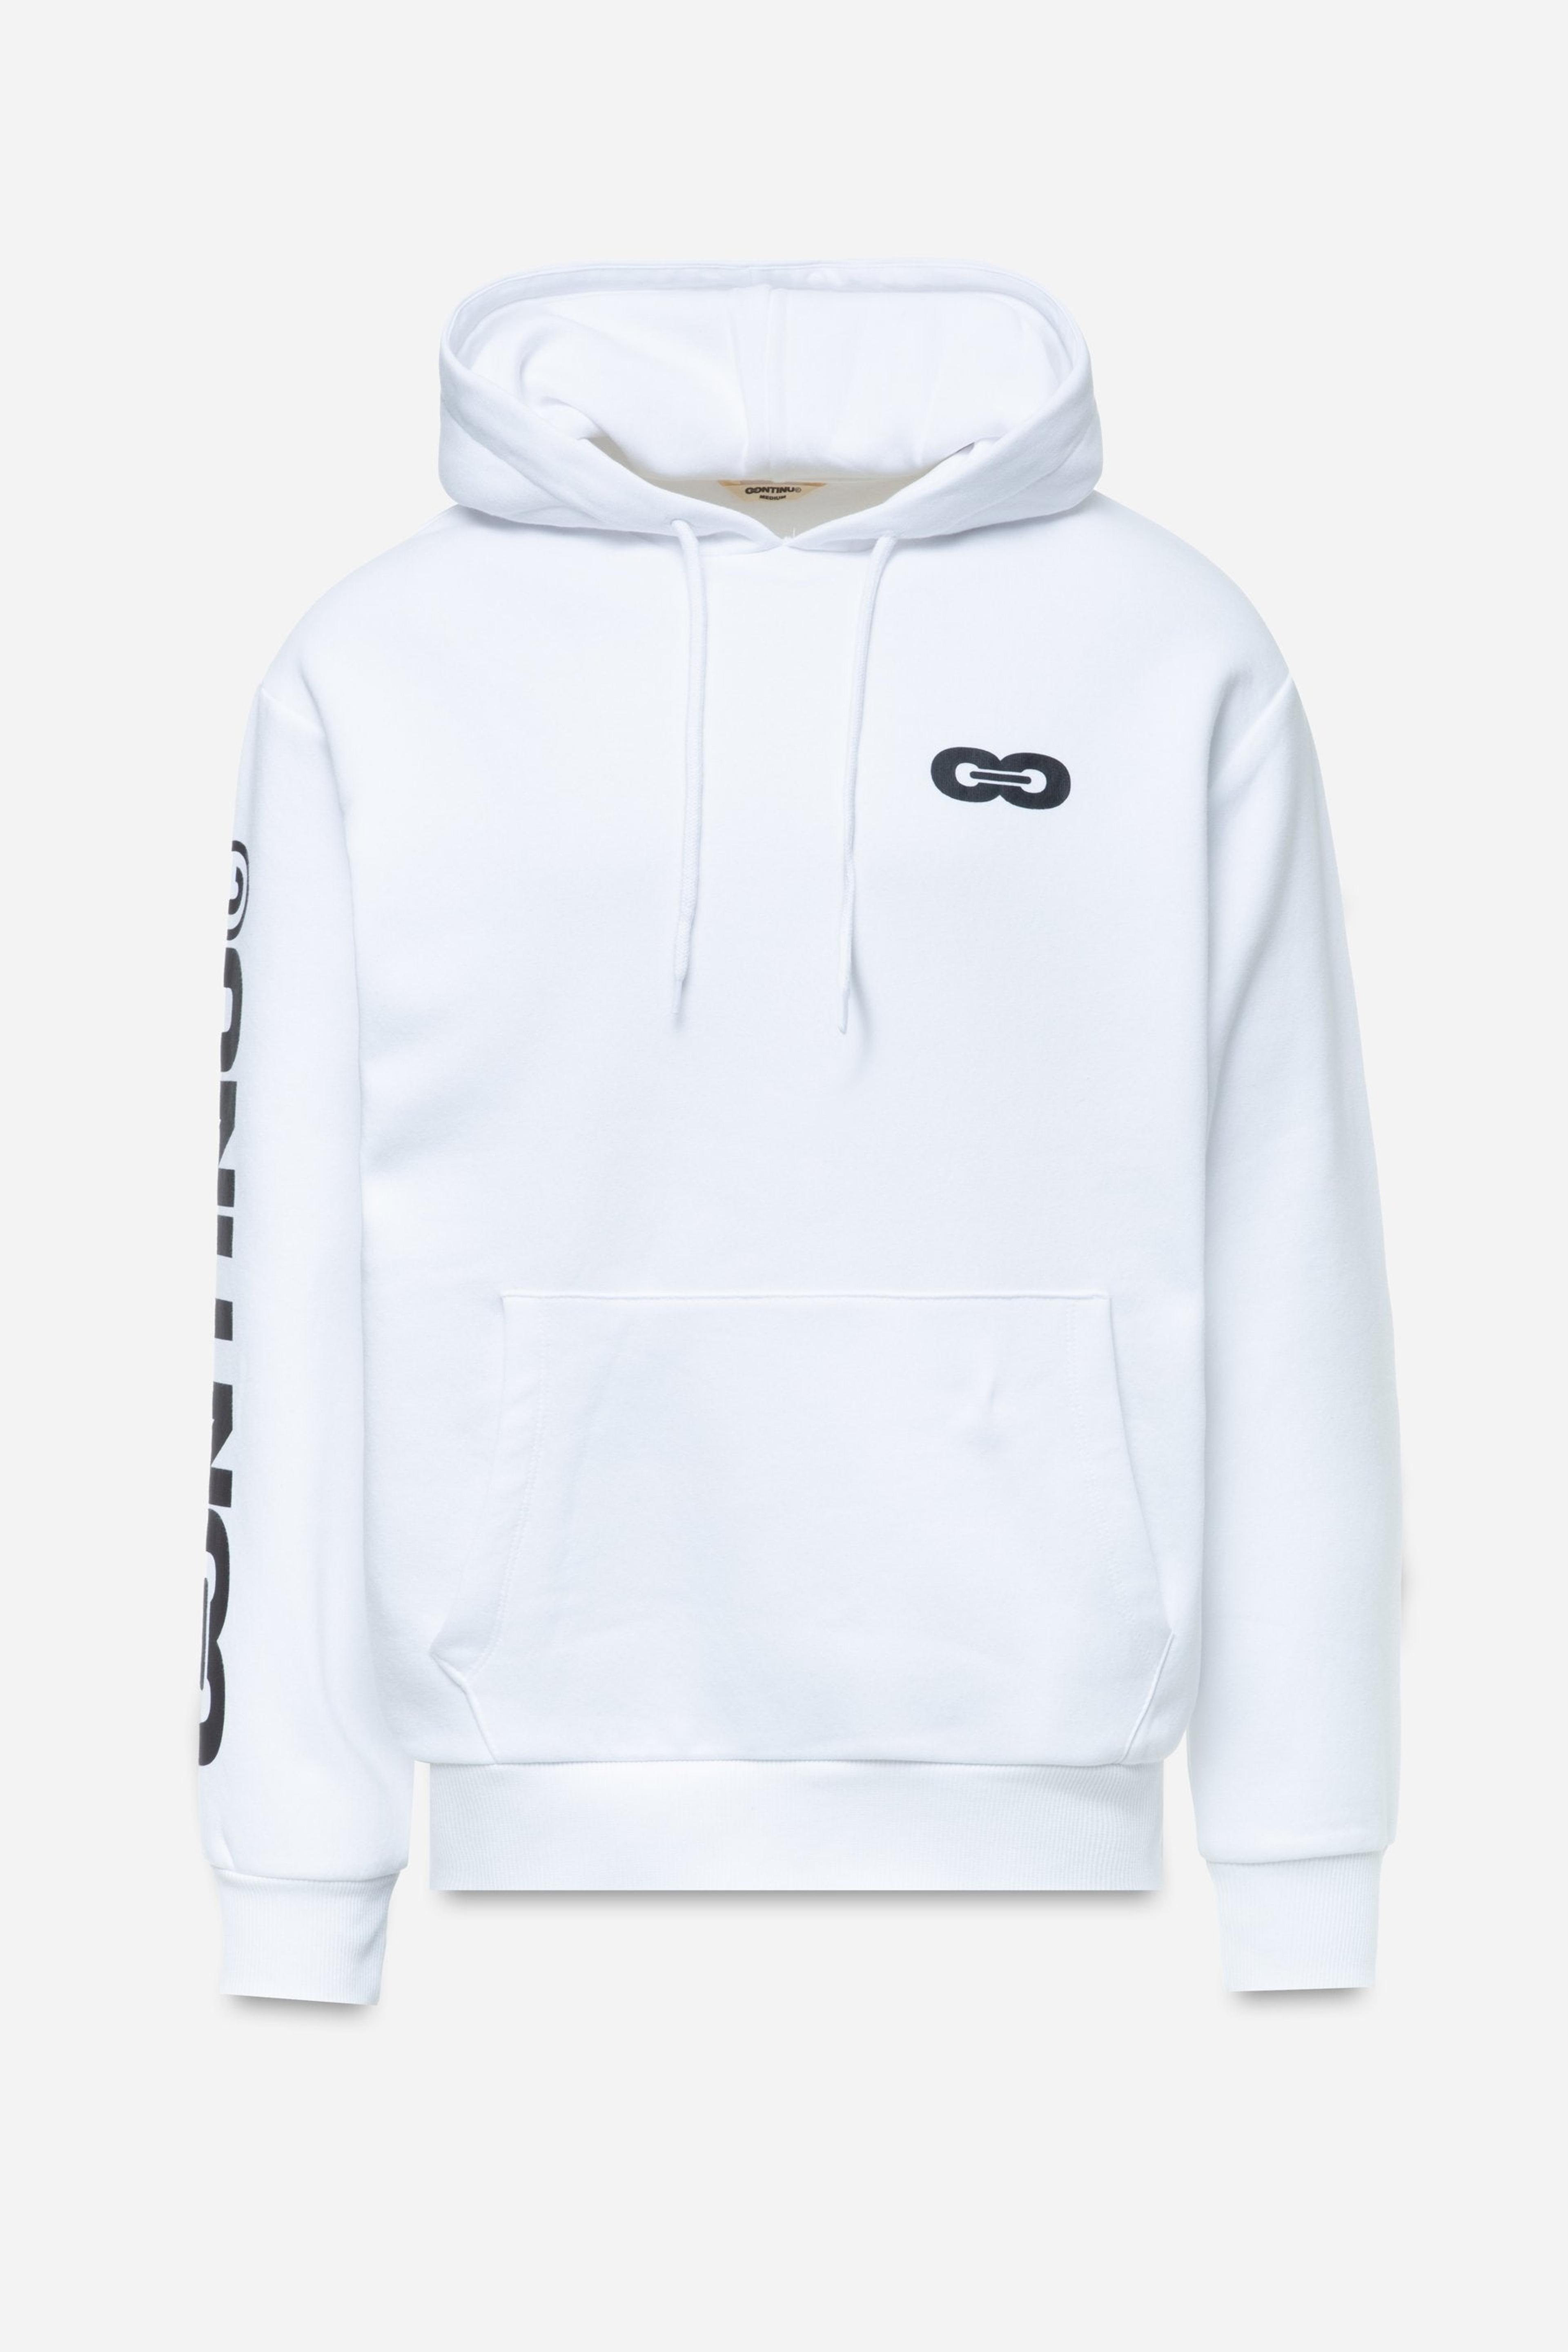 Alternate View 7 of CONTINU8 WHITE OVERSIZED HOODIE